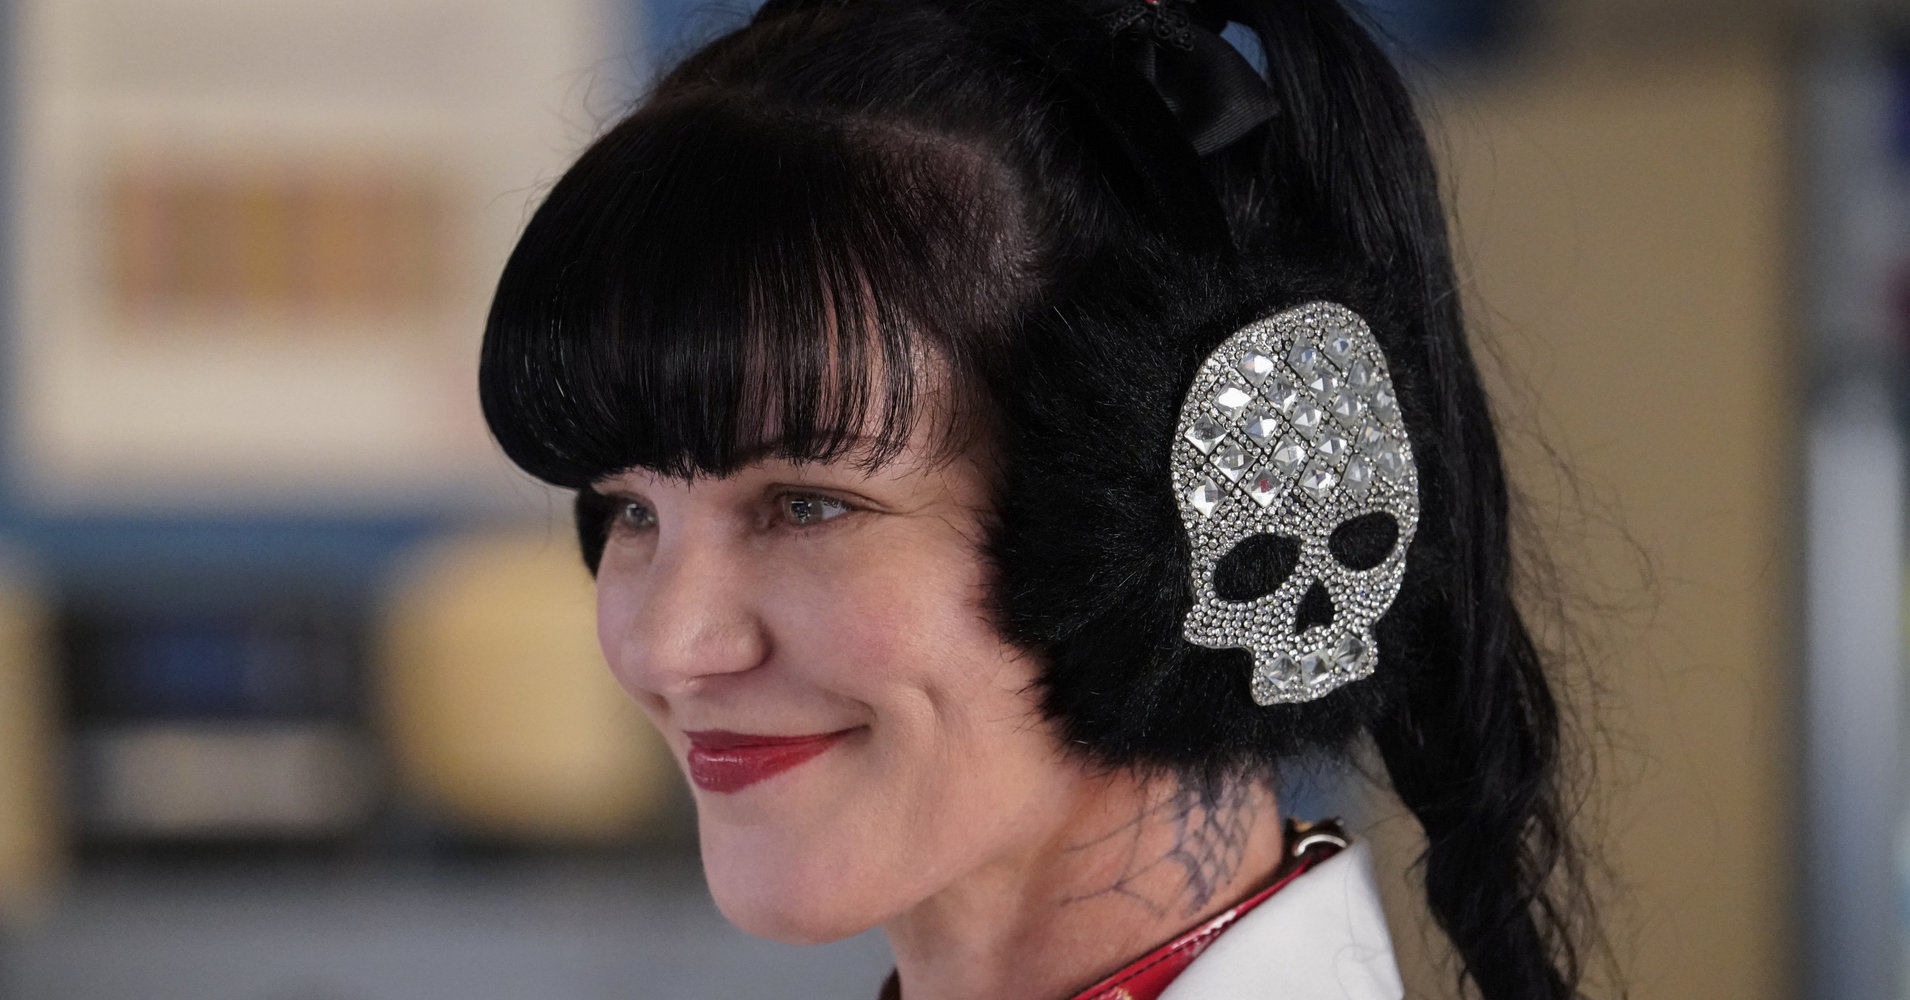 CBS replies to Pauley Perrette's claims of her enduring “multiple physical assaults” on NCIS sets